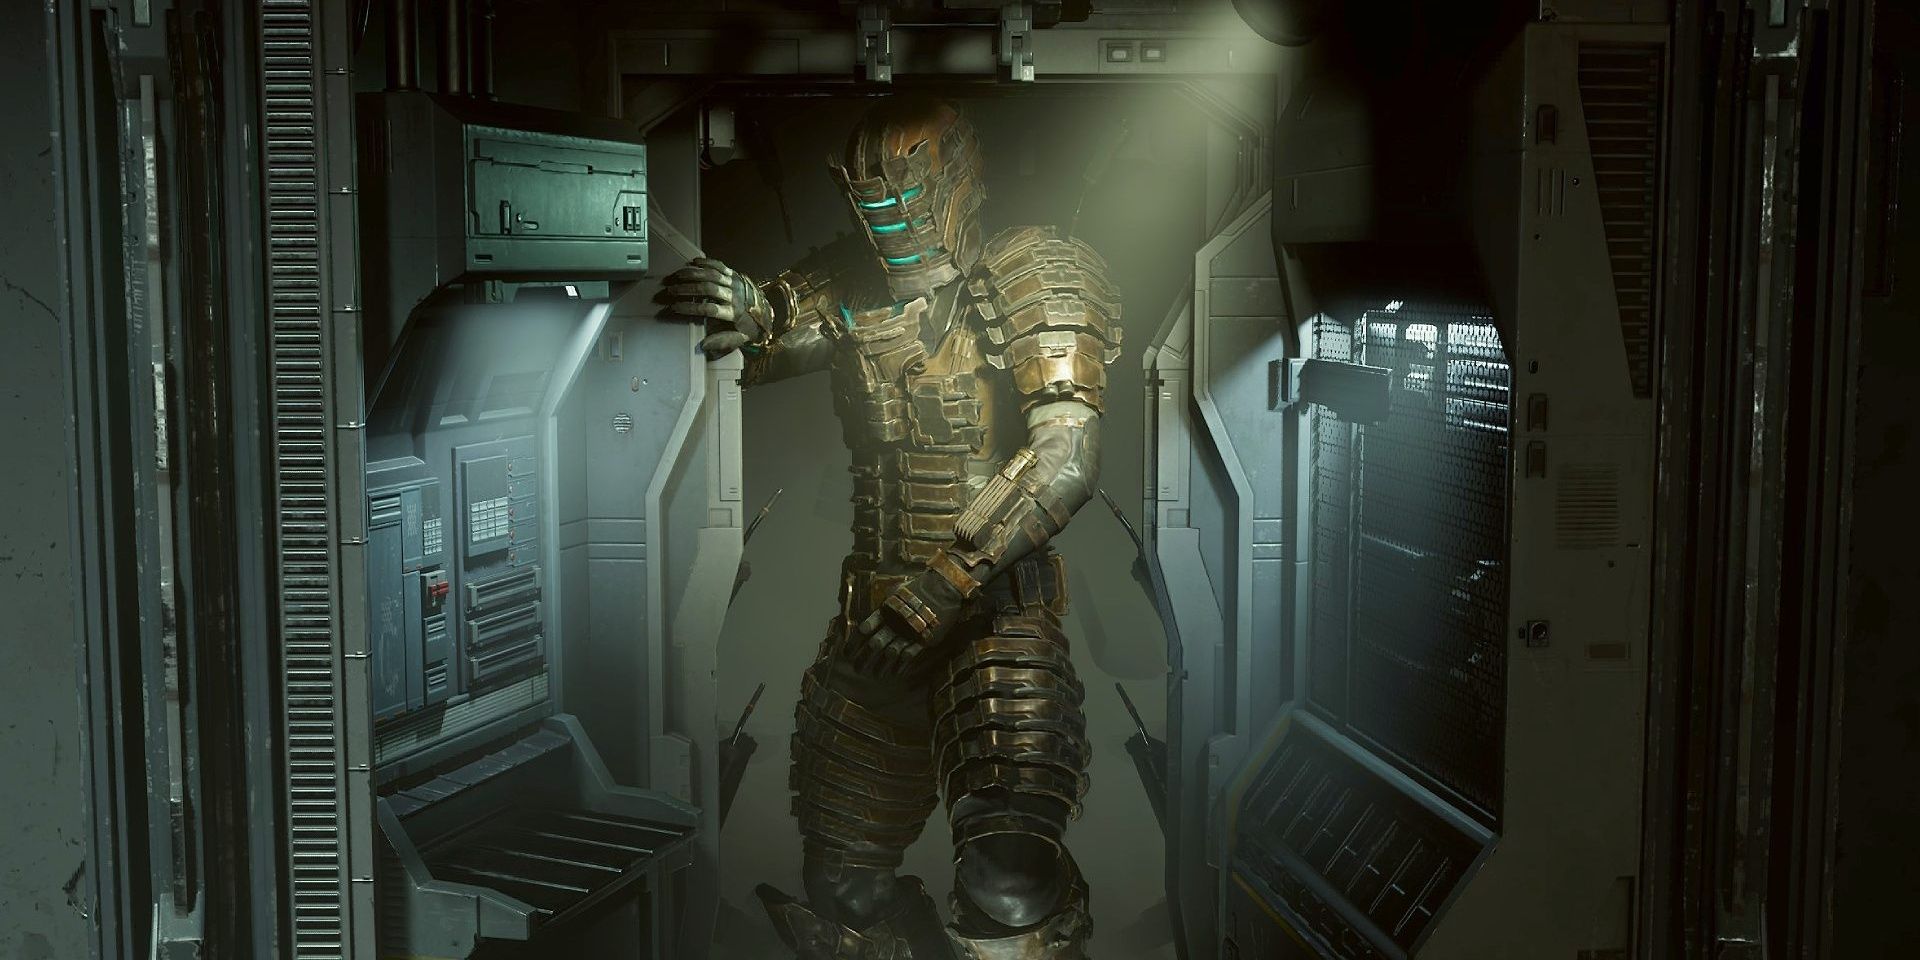 Isaac exiting suit upgrade pod in Dead Space